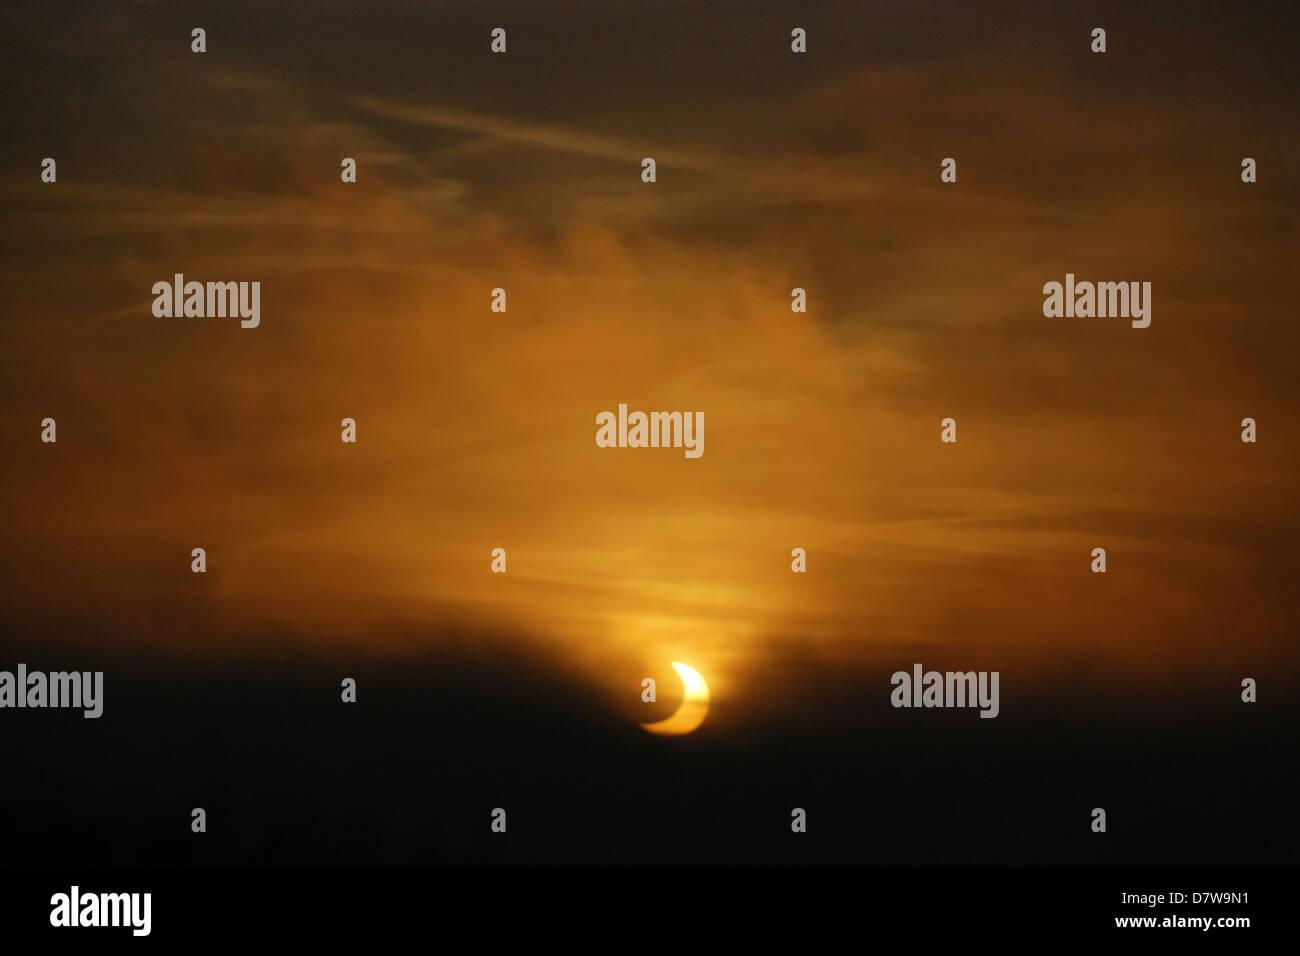 Partial eclipse of the sun seen through fog during sunrise Stock Photo